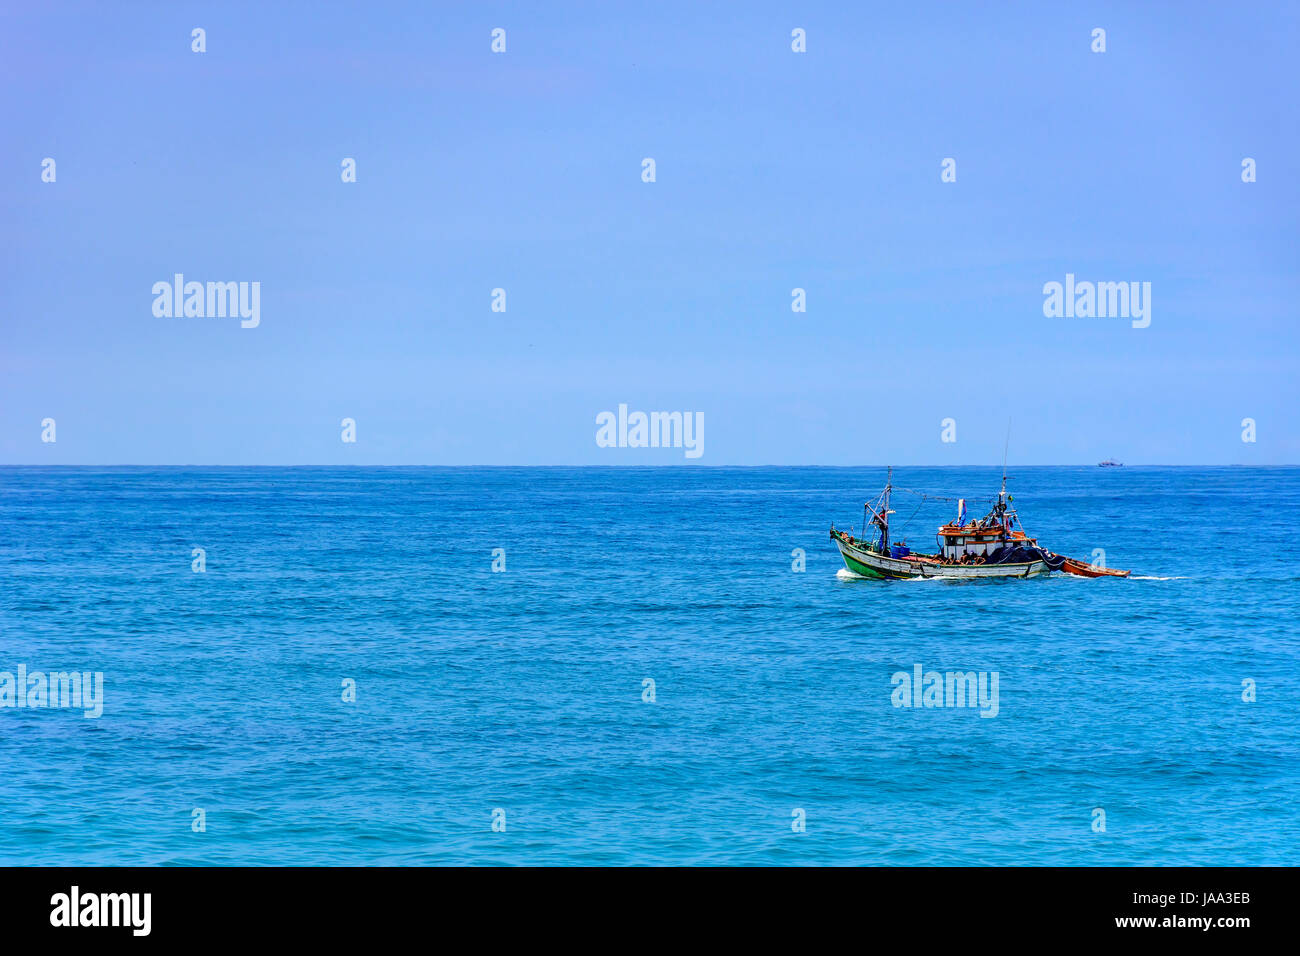 Fishing boat sailing in the waters of the Rio de Janeiro sea Stock Photo